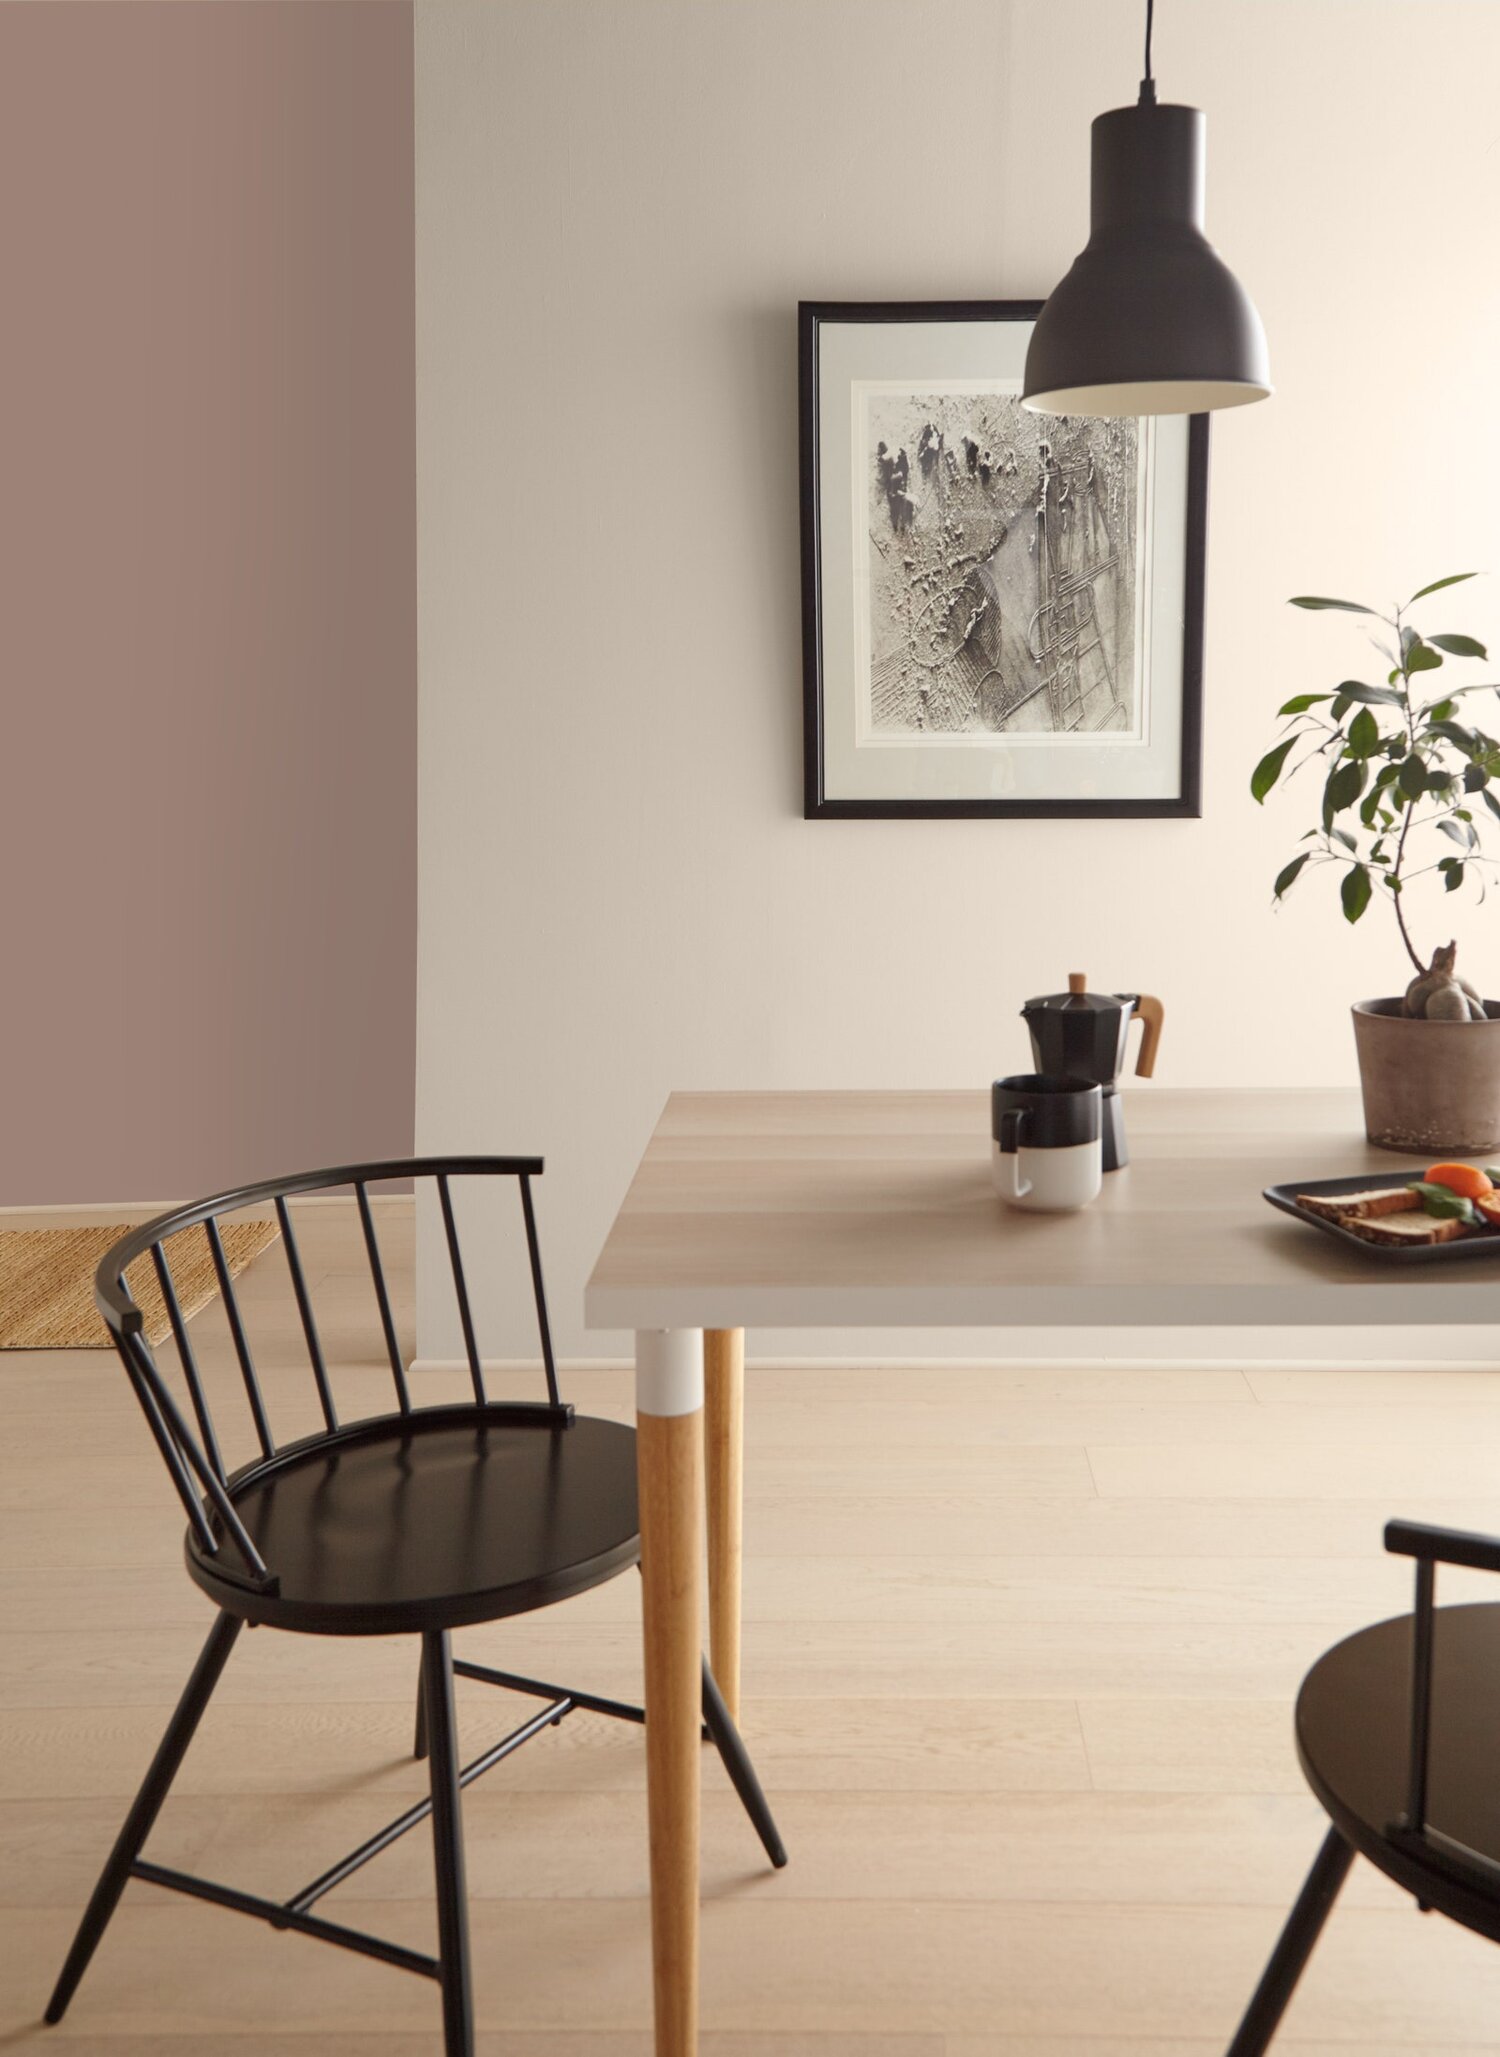 The Color Trends 2021: Behr Casual Comfort Palette - The Nordroom